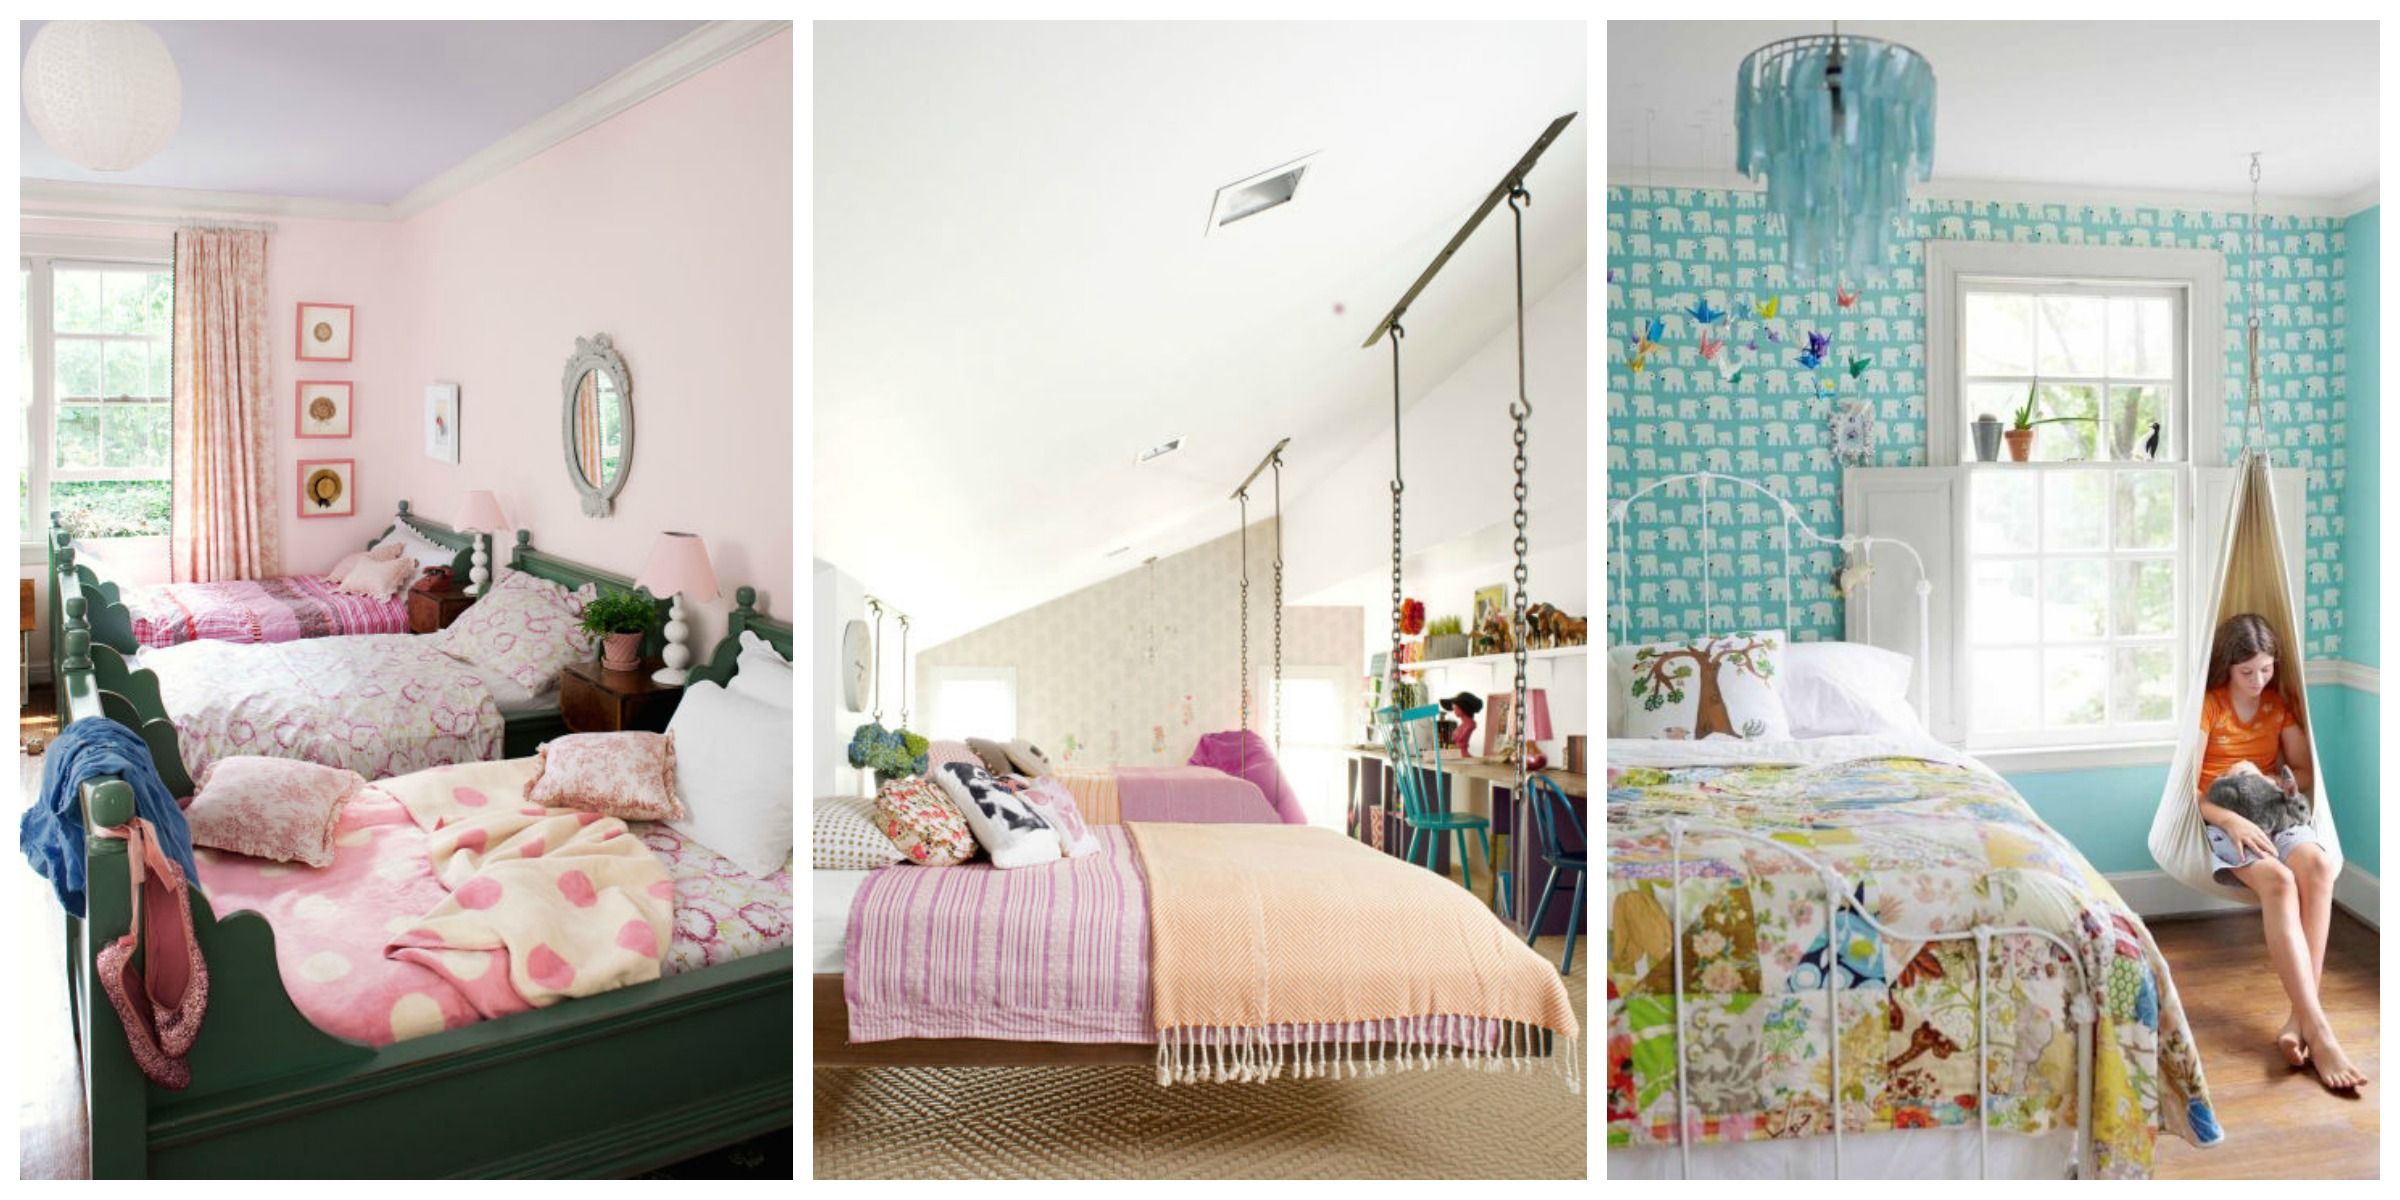 12 Fun Girl'S Bedroom Decor Ideas - Cute Room Decorating For Girls